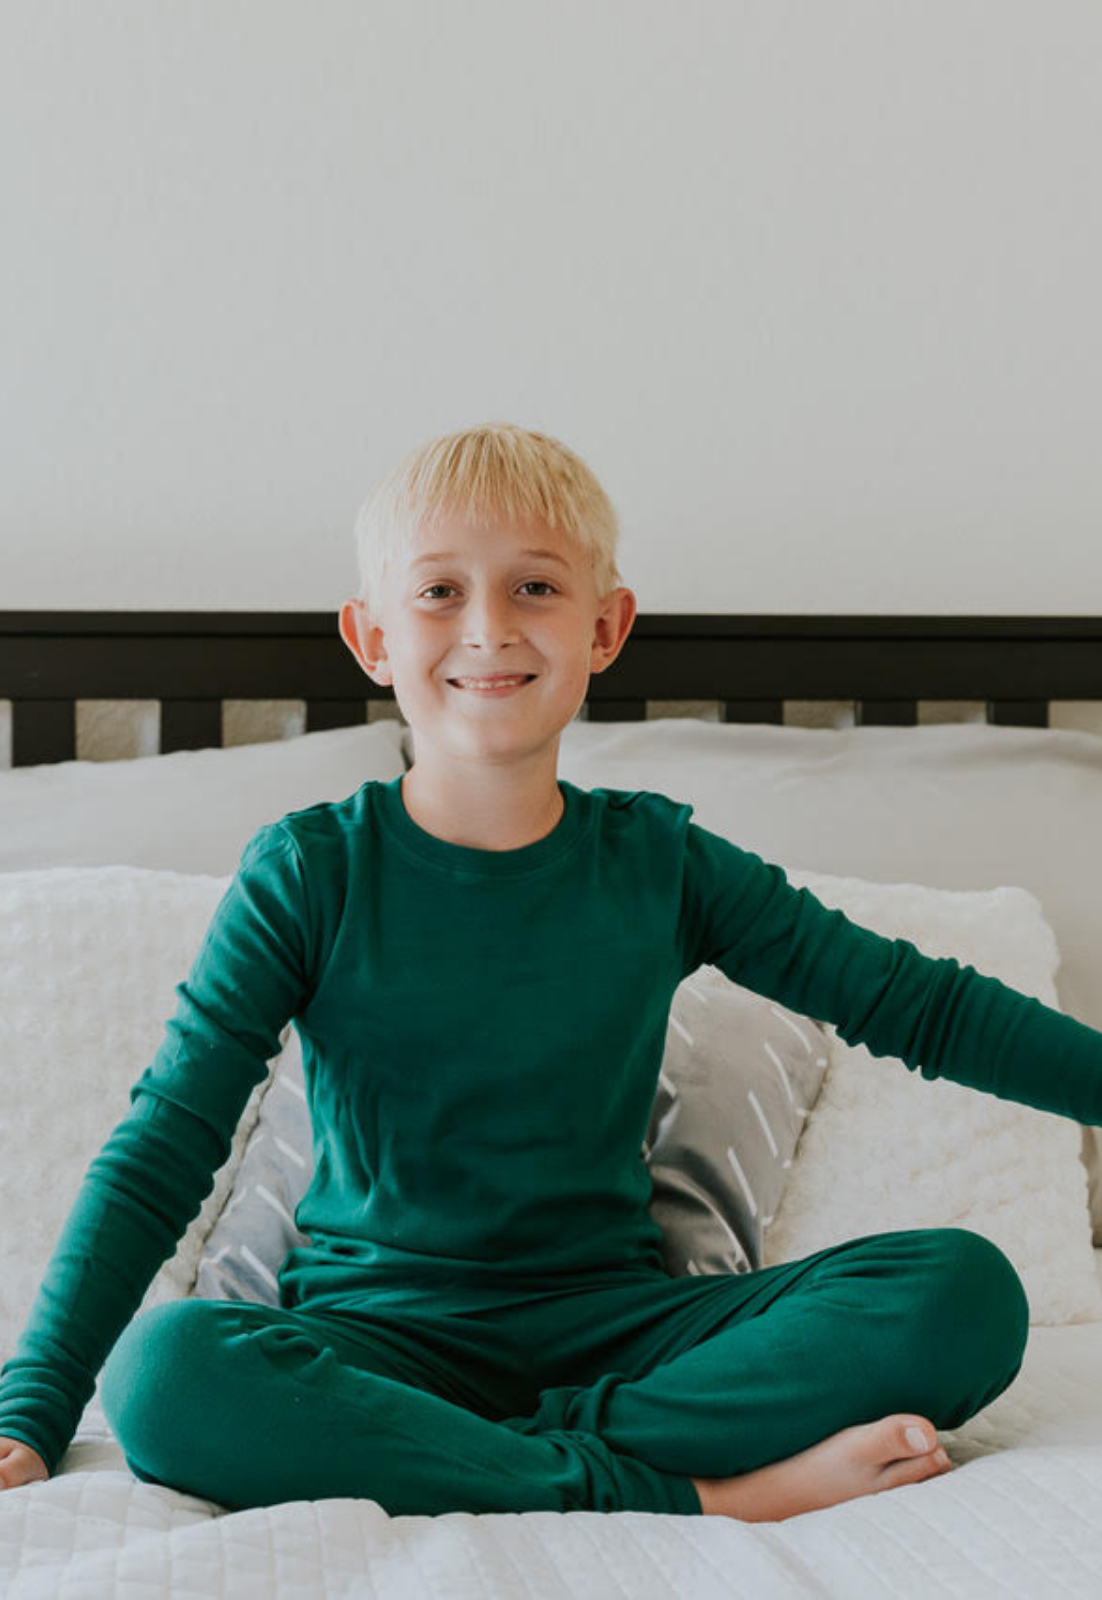 Boys and Girls Soft Organic Cotton Snug Fit Pajama Sets  | Forest Green